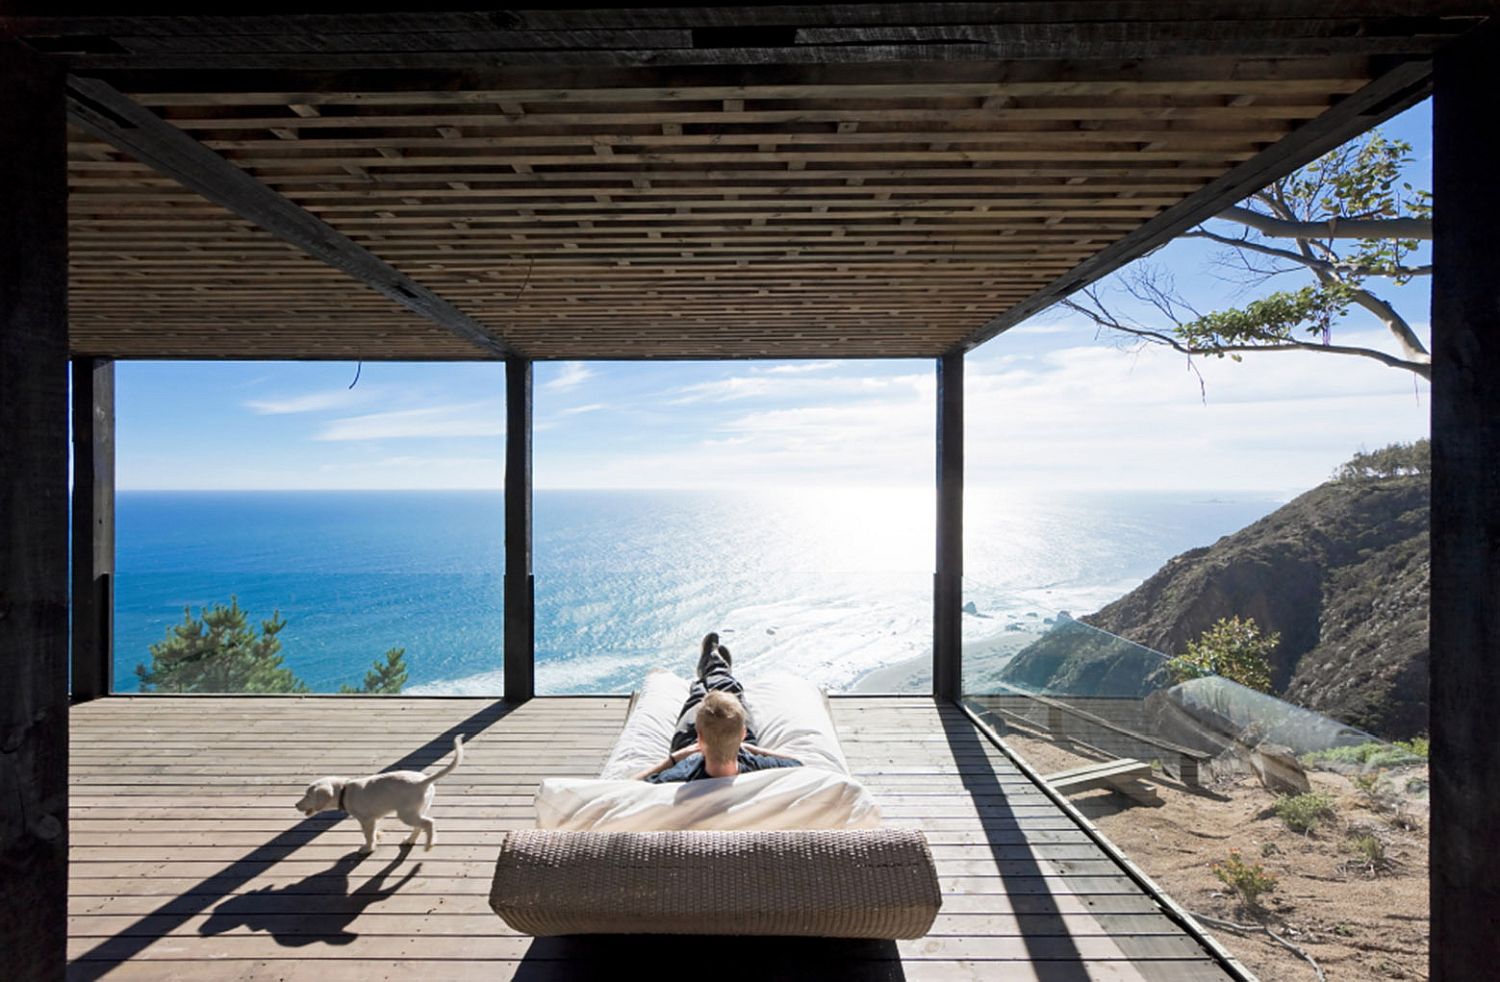 Amazing views of the ocean and the cliff from the holiday home